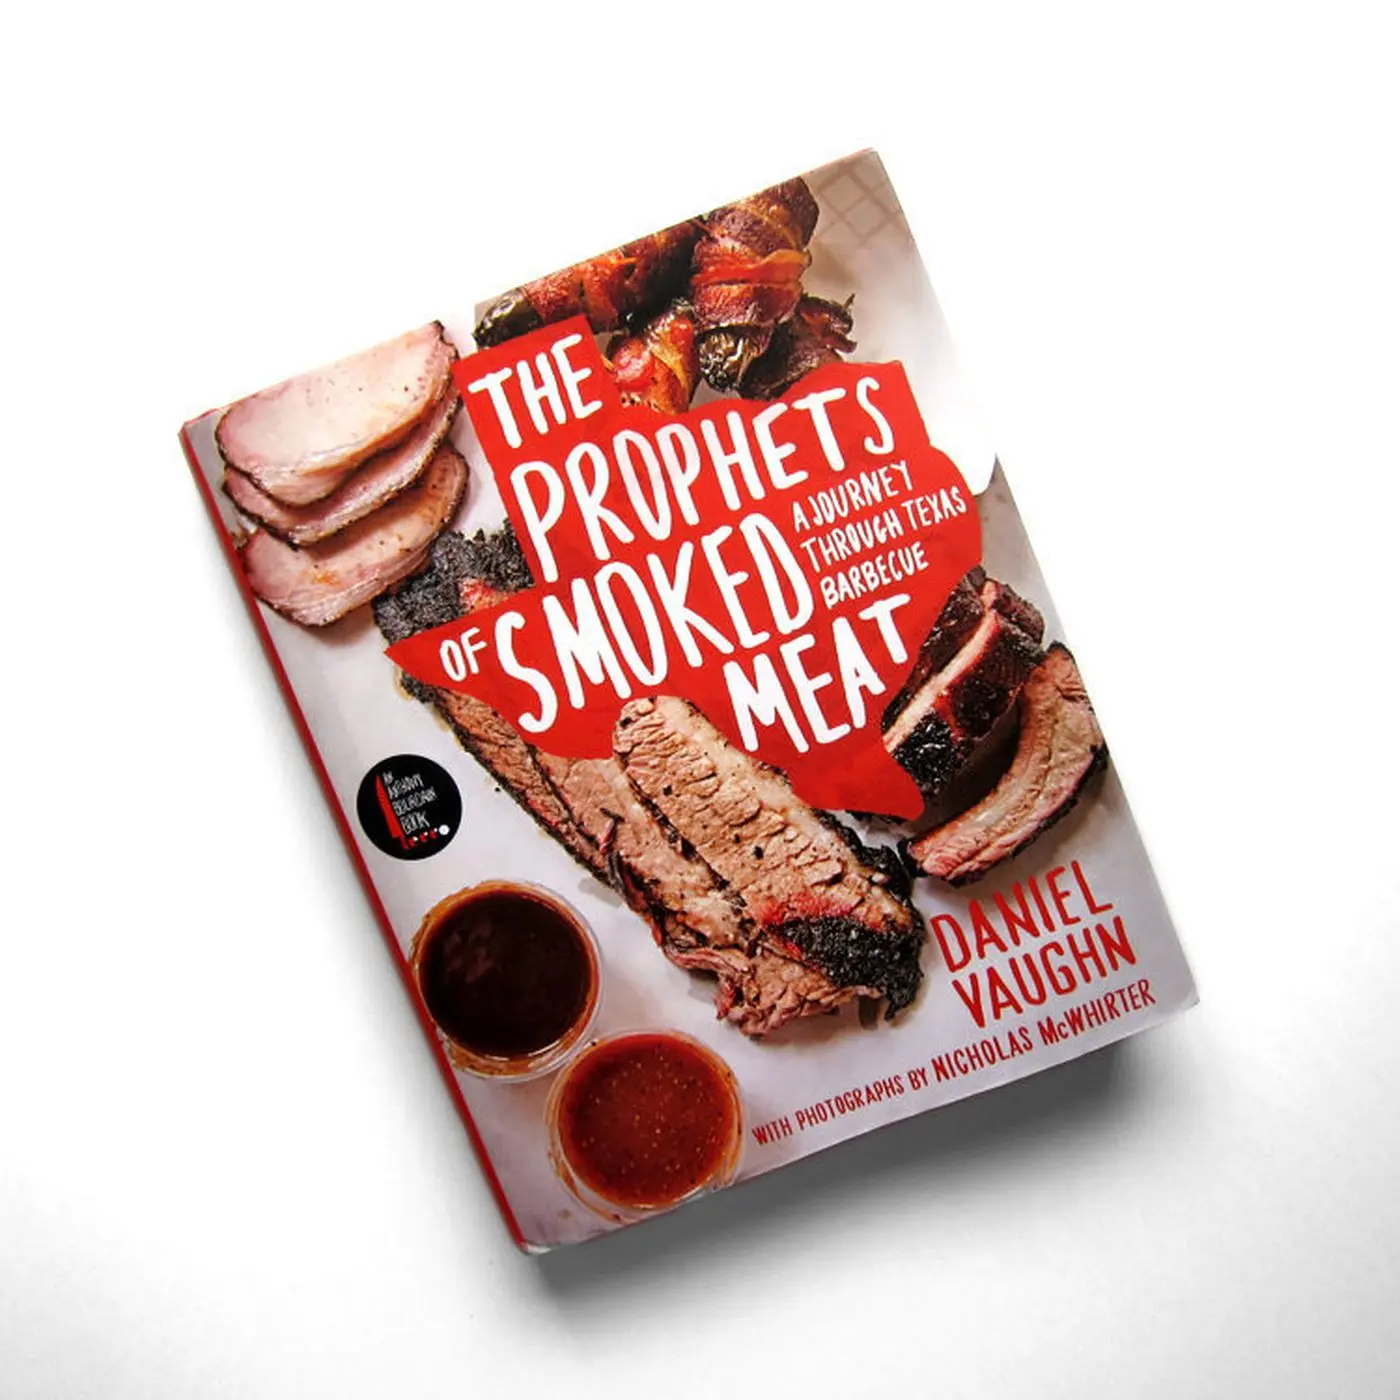 prophets of smoked meat - Who invented barbeque